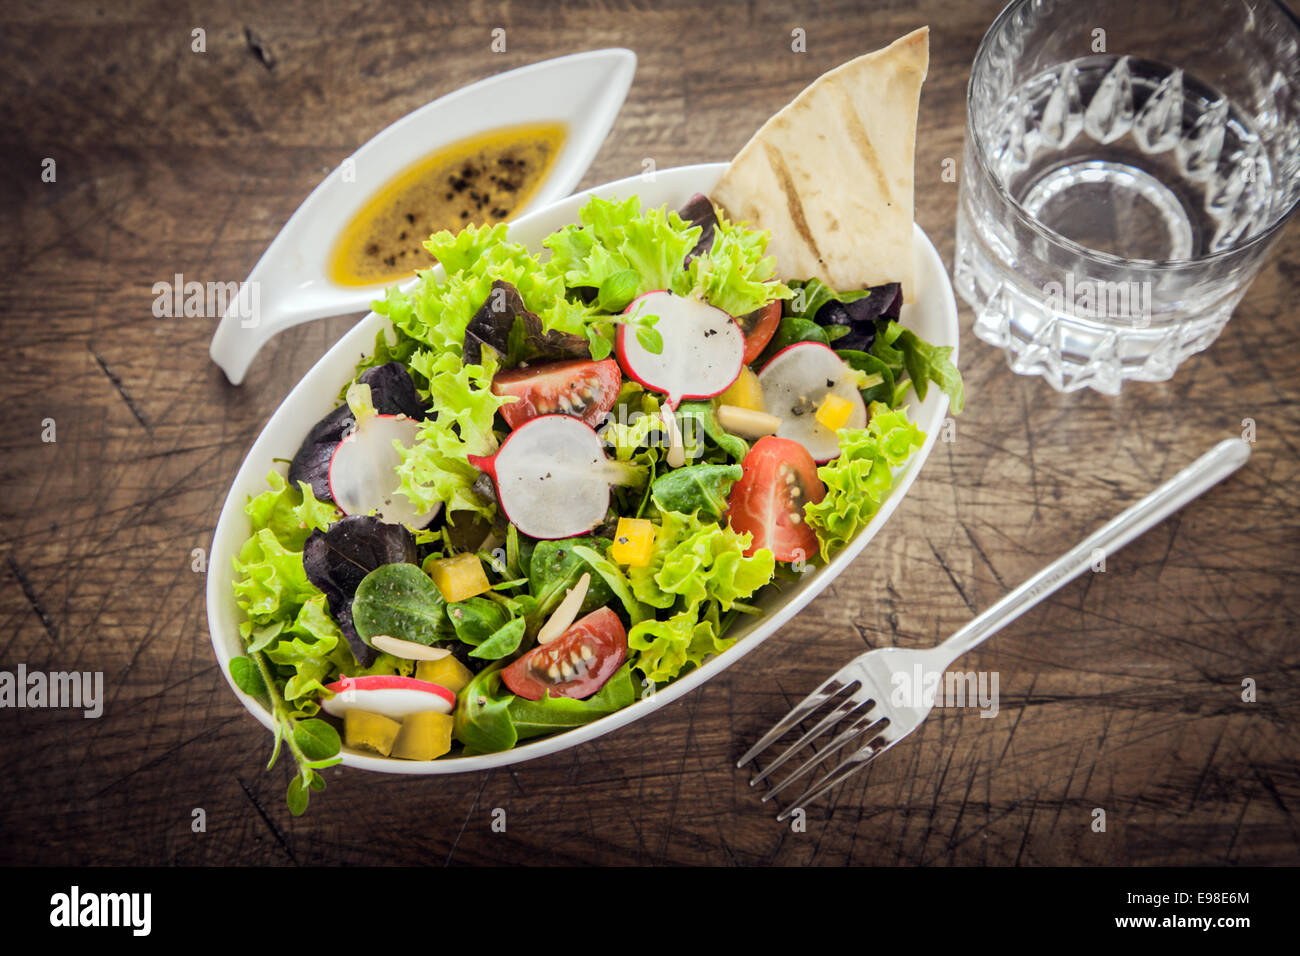 Healthy leafy green mixed salad with fresh spring ingredients on a grunge wood table with a savory oil salad dressing, view from above Stock Photo